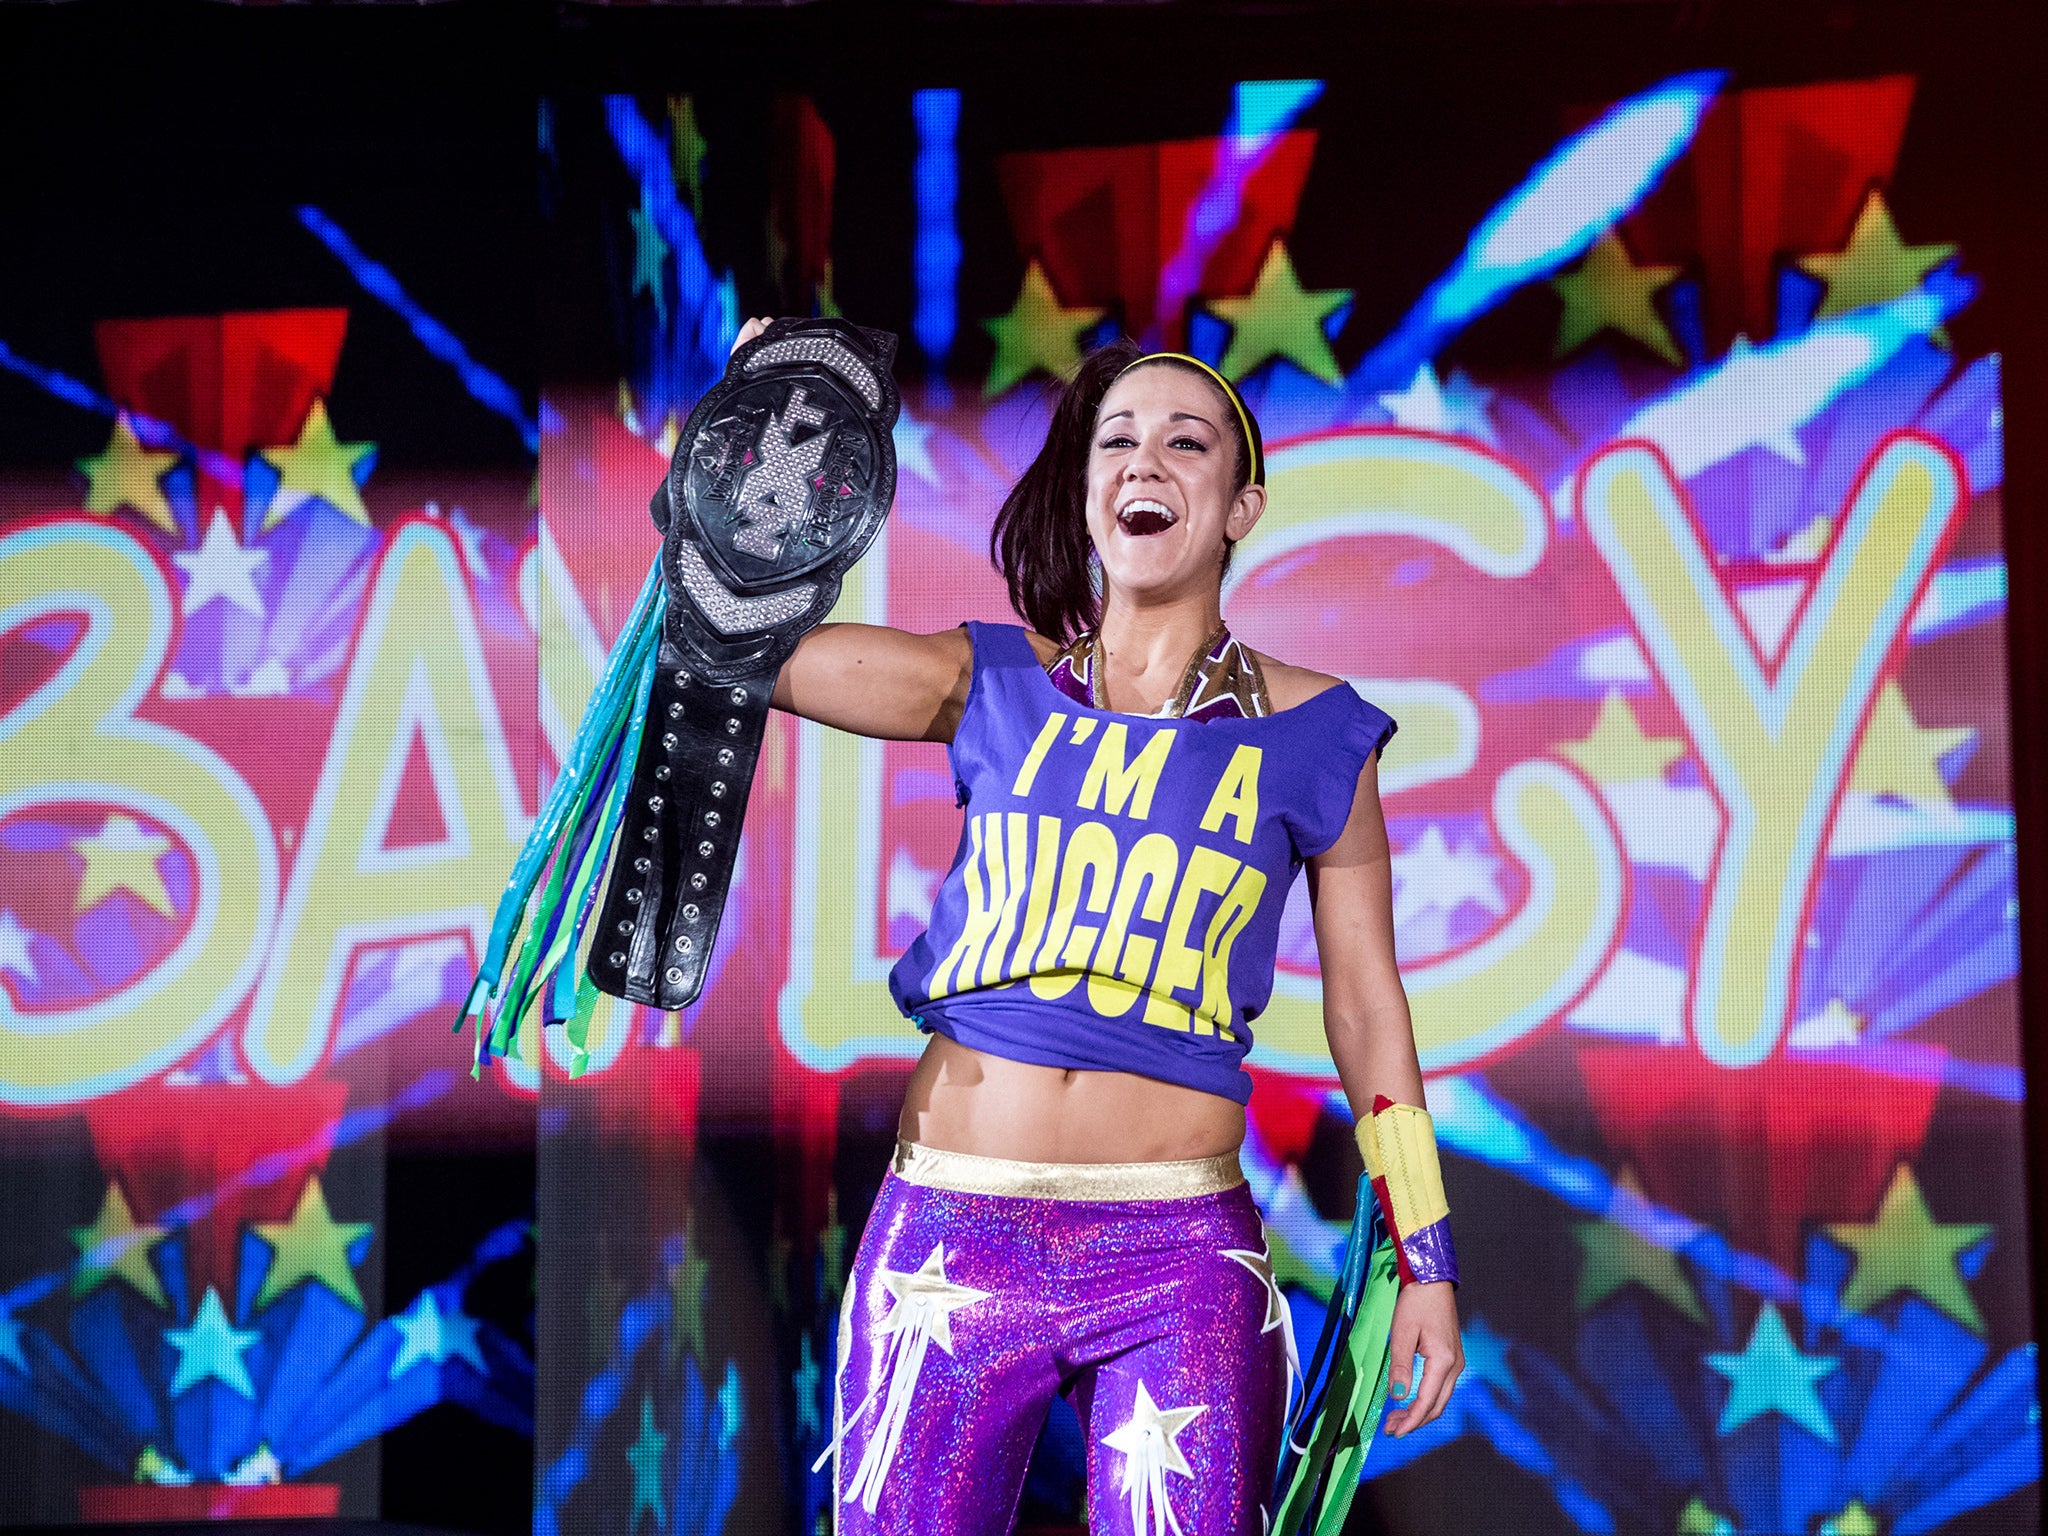 Bayley enters the arena in Glasgow on WWE's most recent tour